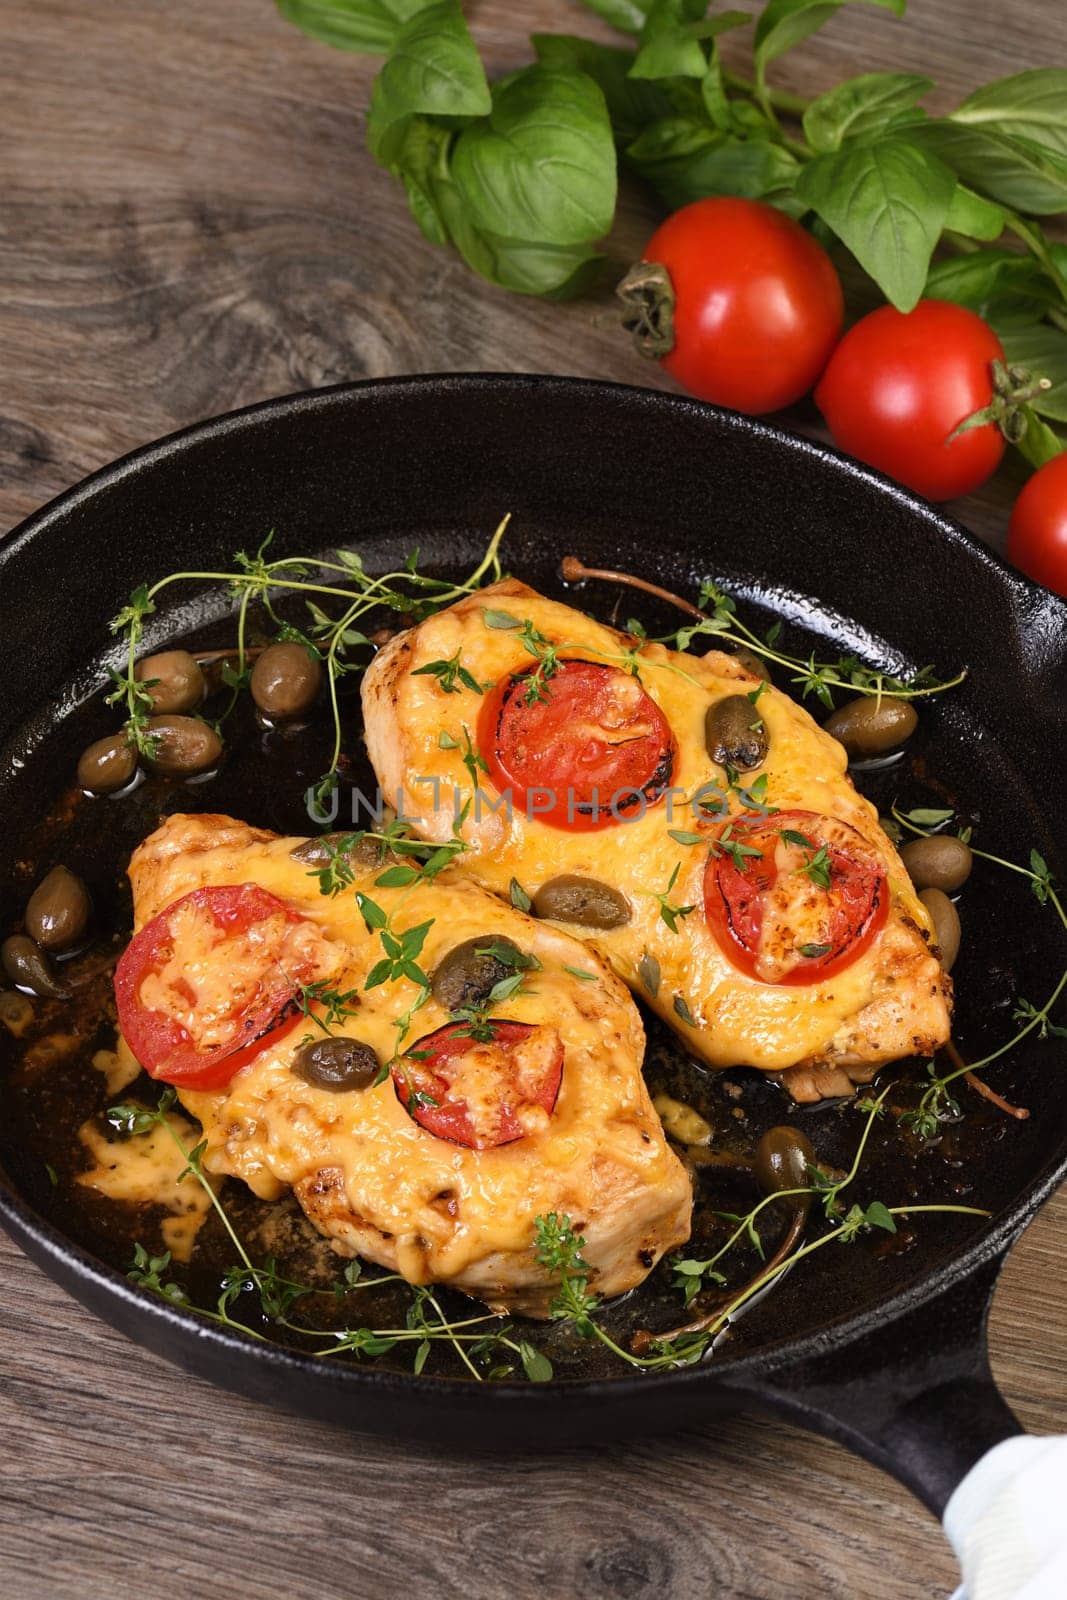 Chicken breast with cheese and tomatoes by Apolonia